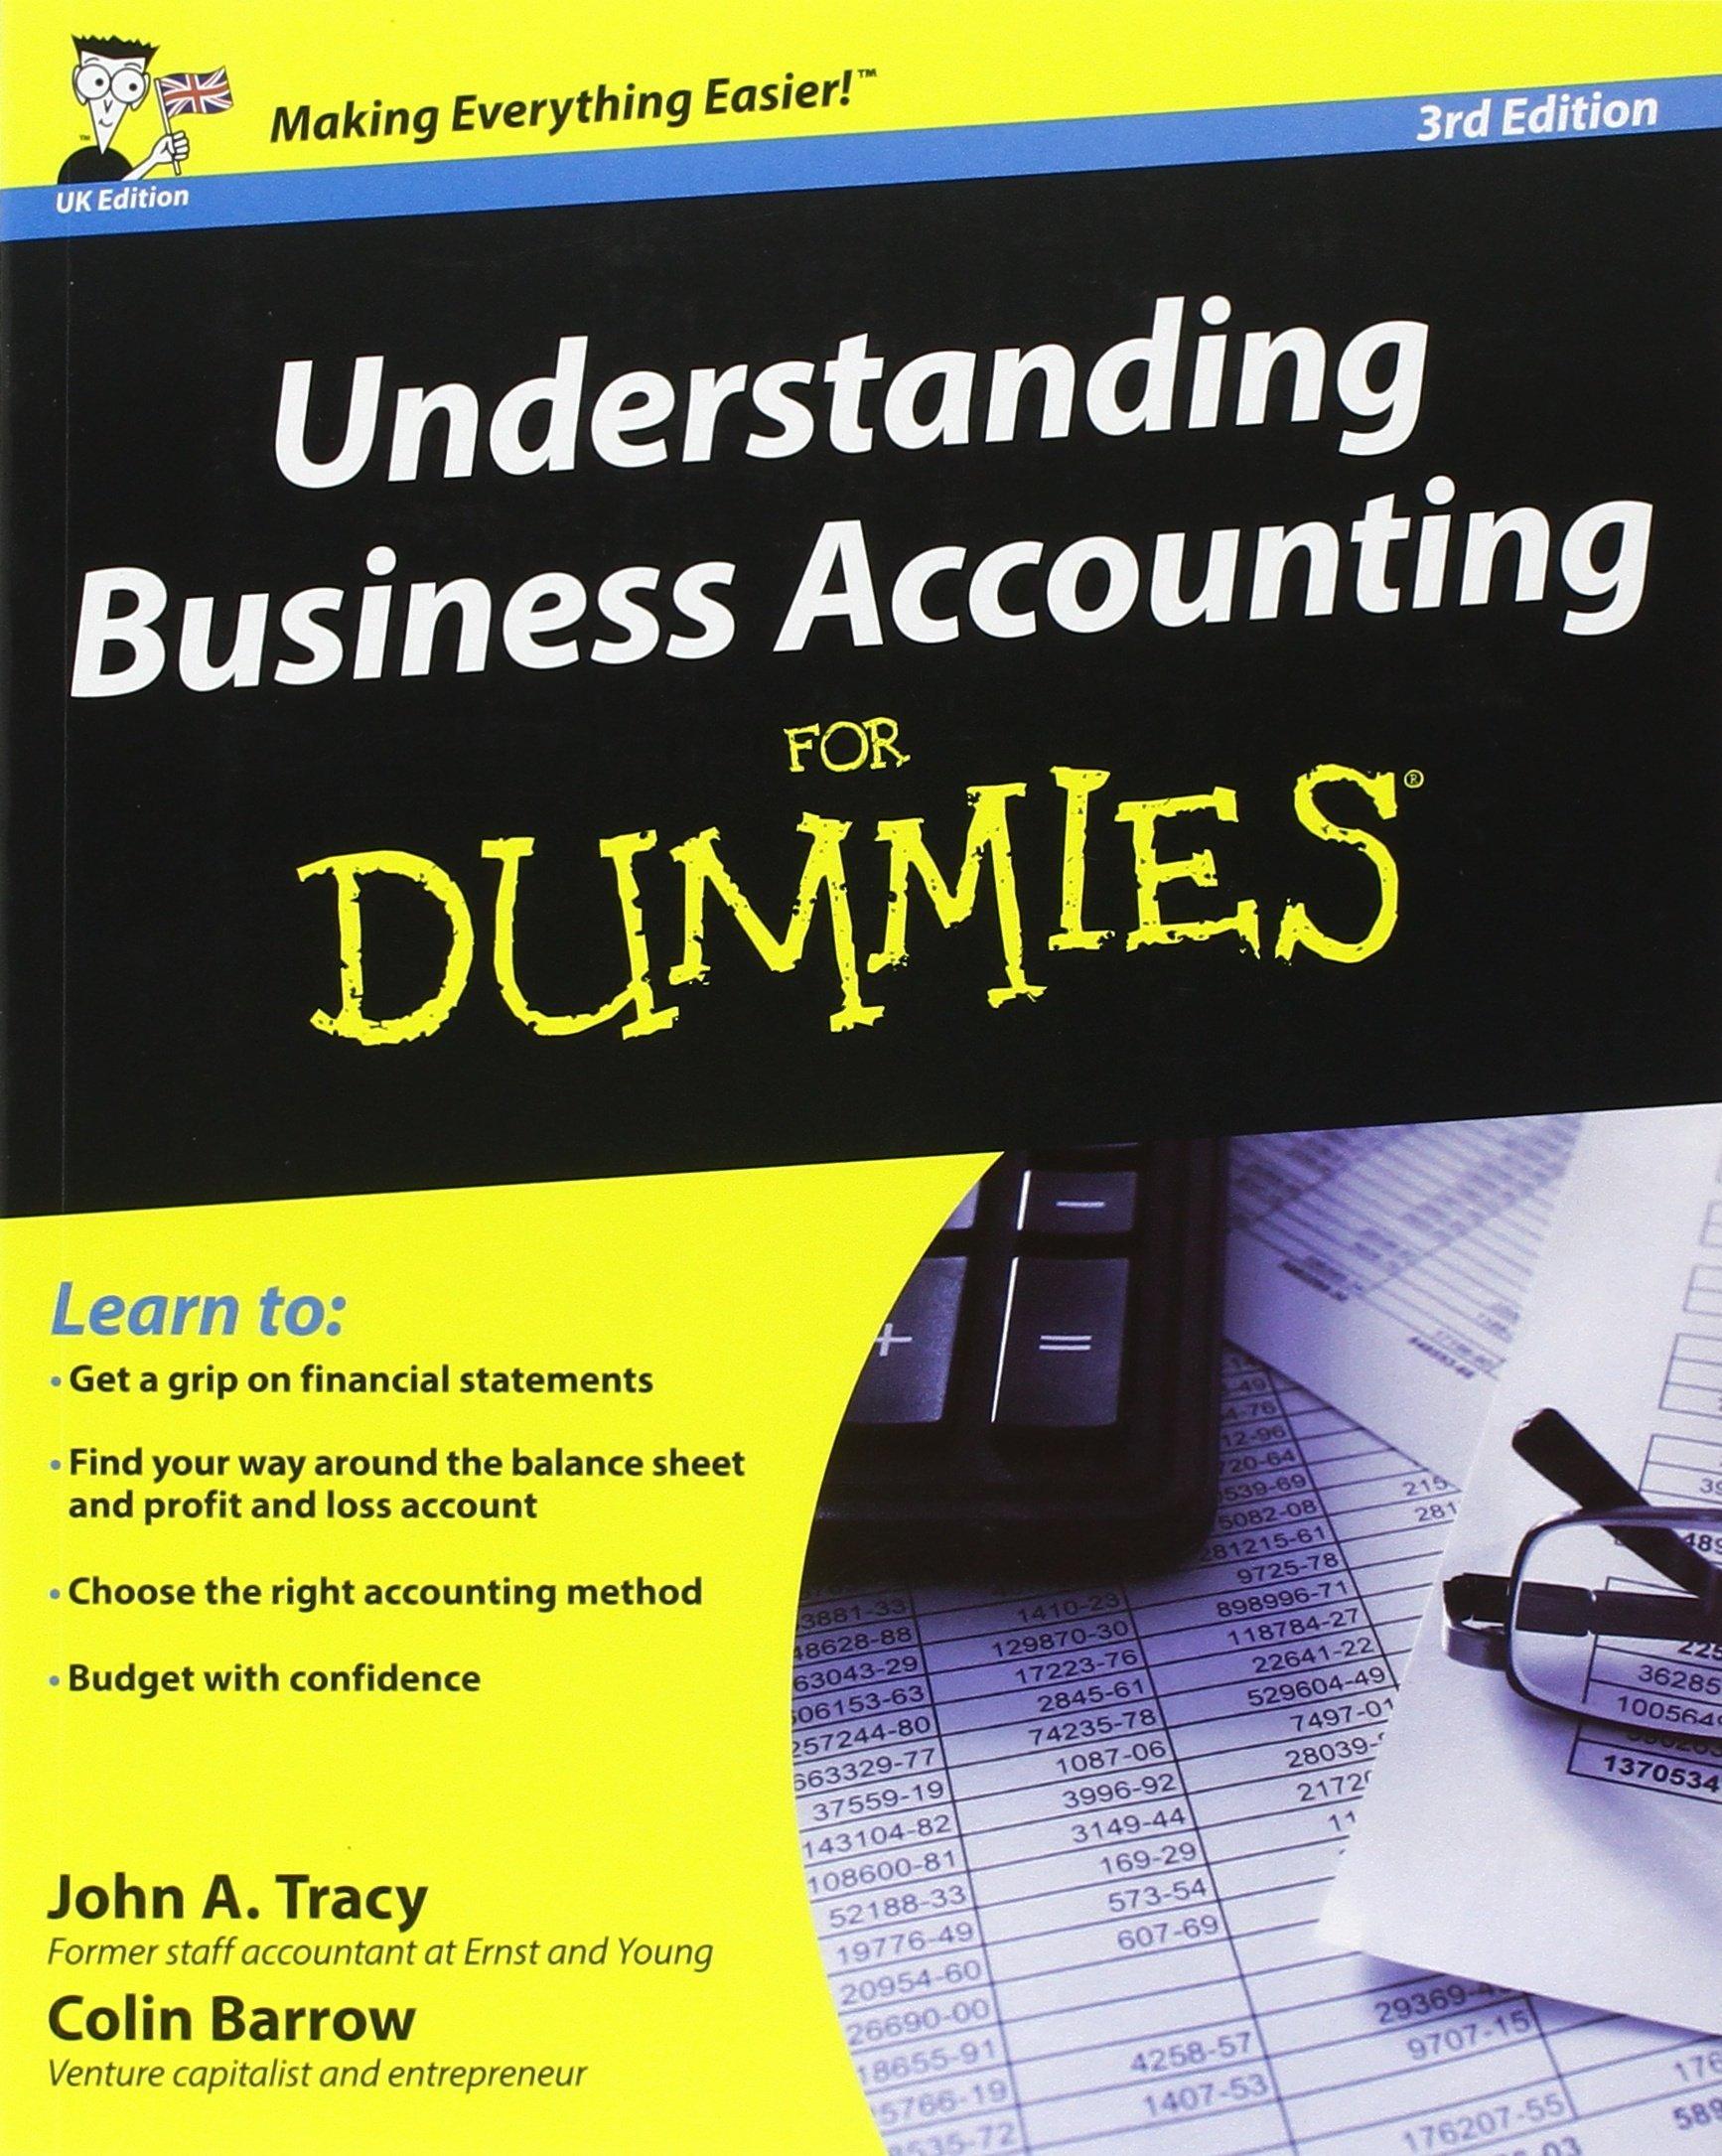 understanding business accounting for dummies 3rd edition john a. tracy, colin barrow 1119951283,